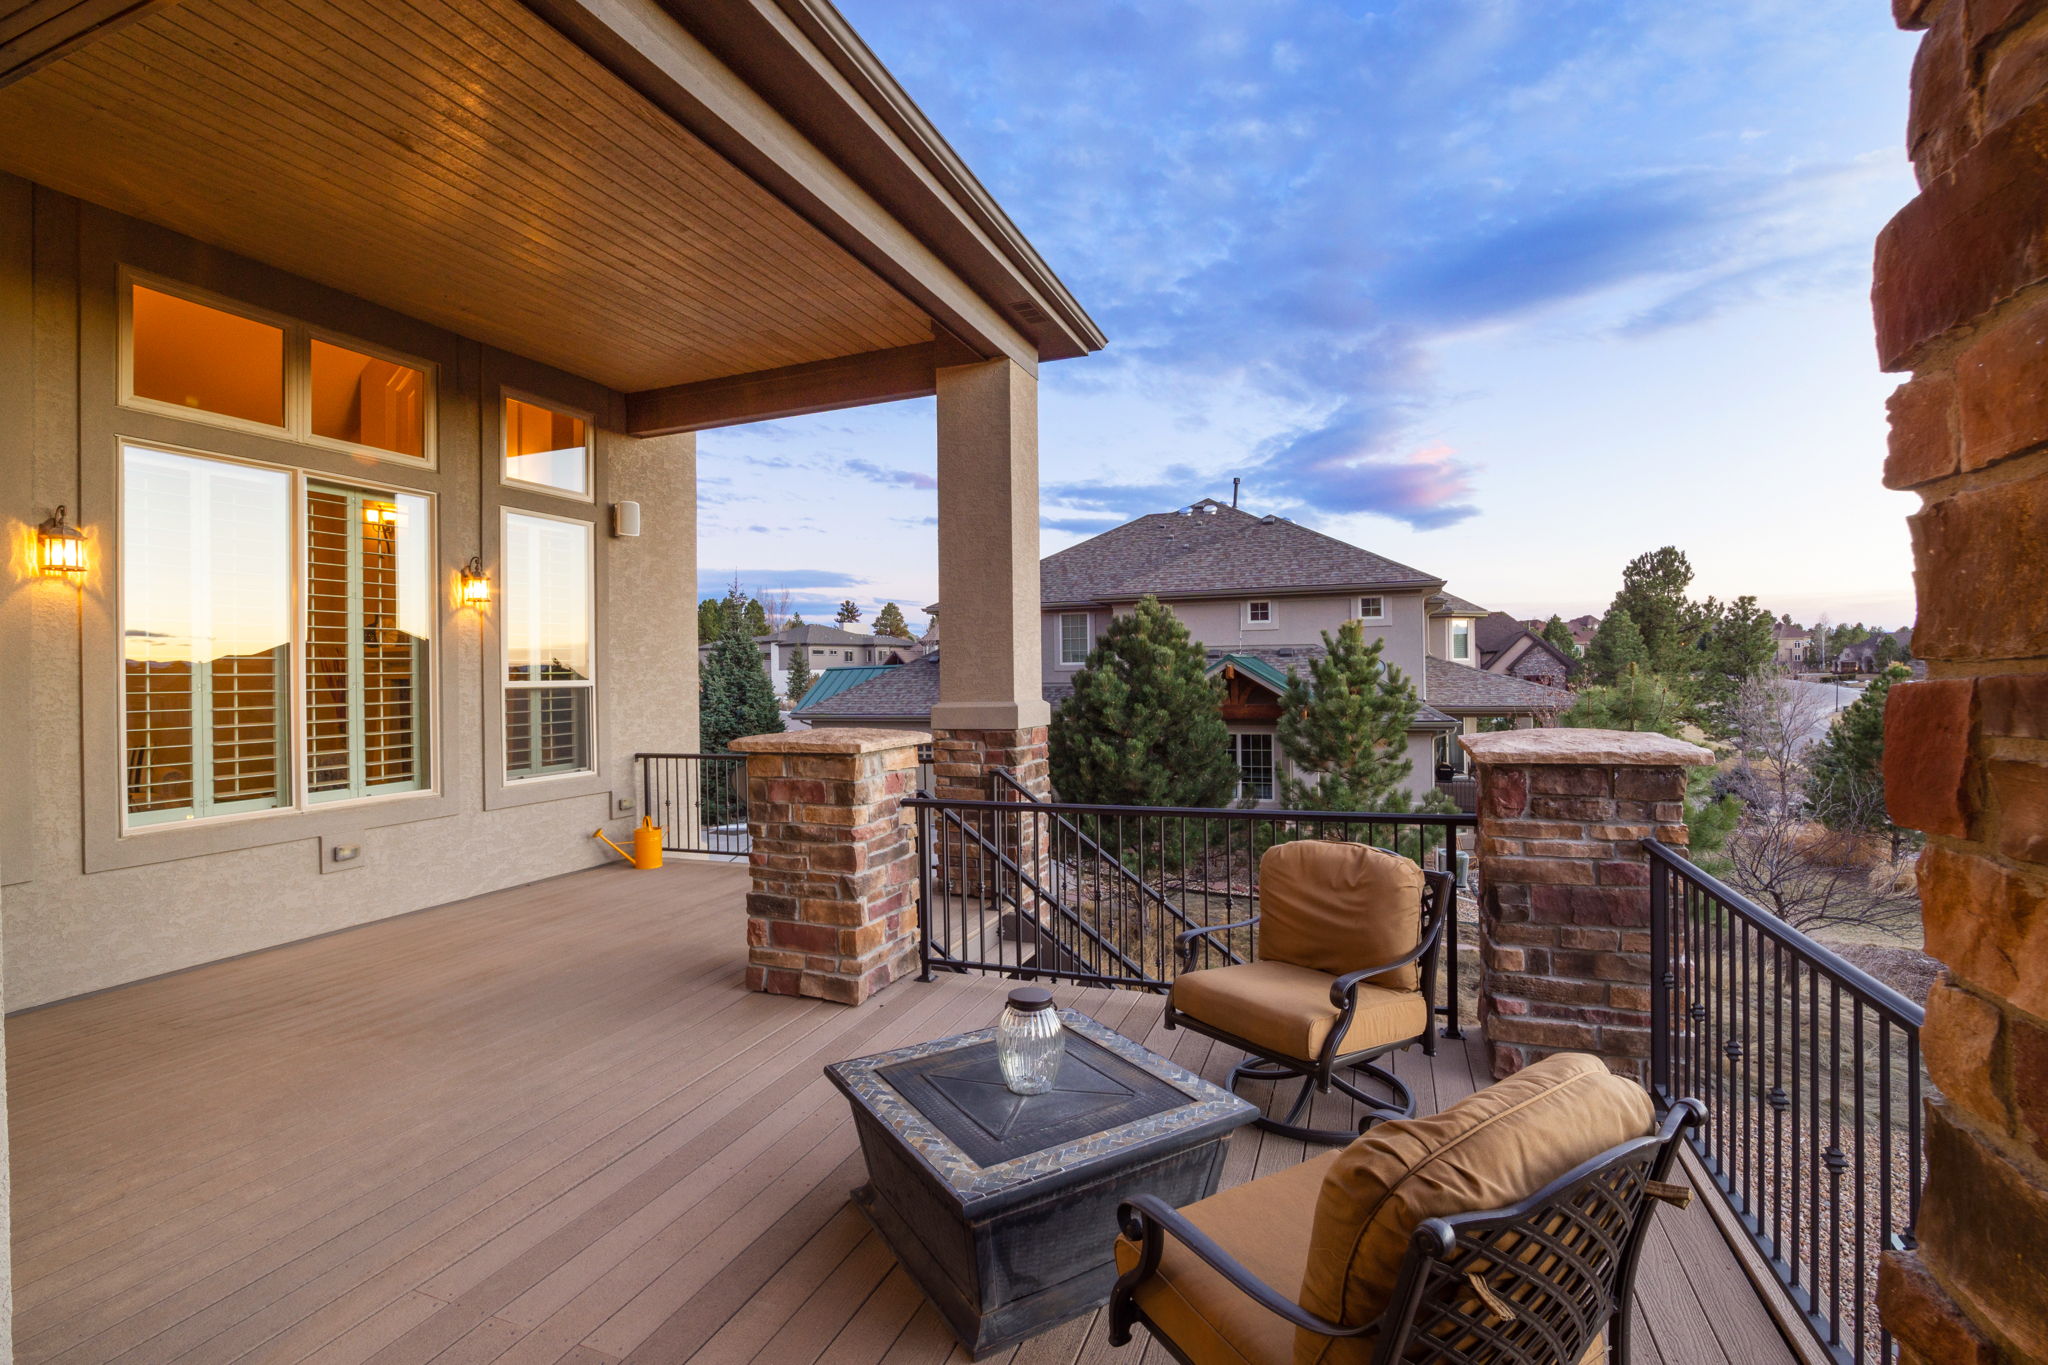 Covered west facing deck to enjoy the beautiful Colorado sunsets